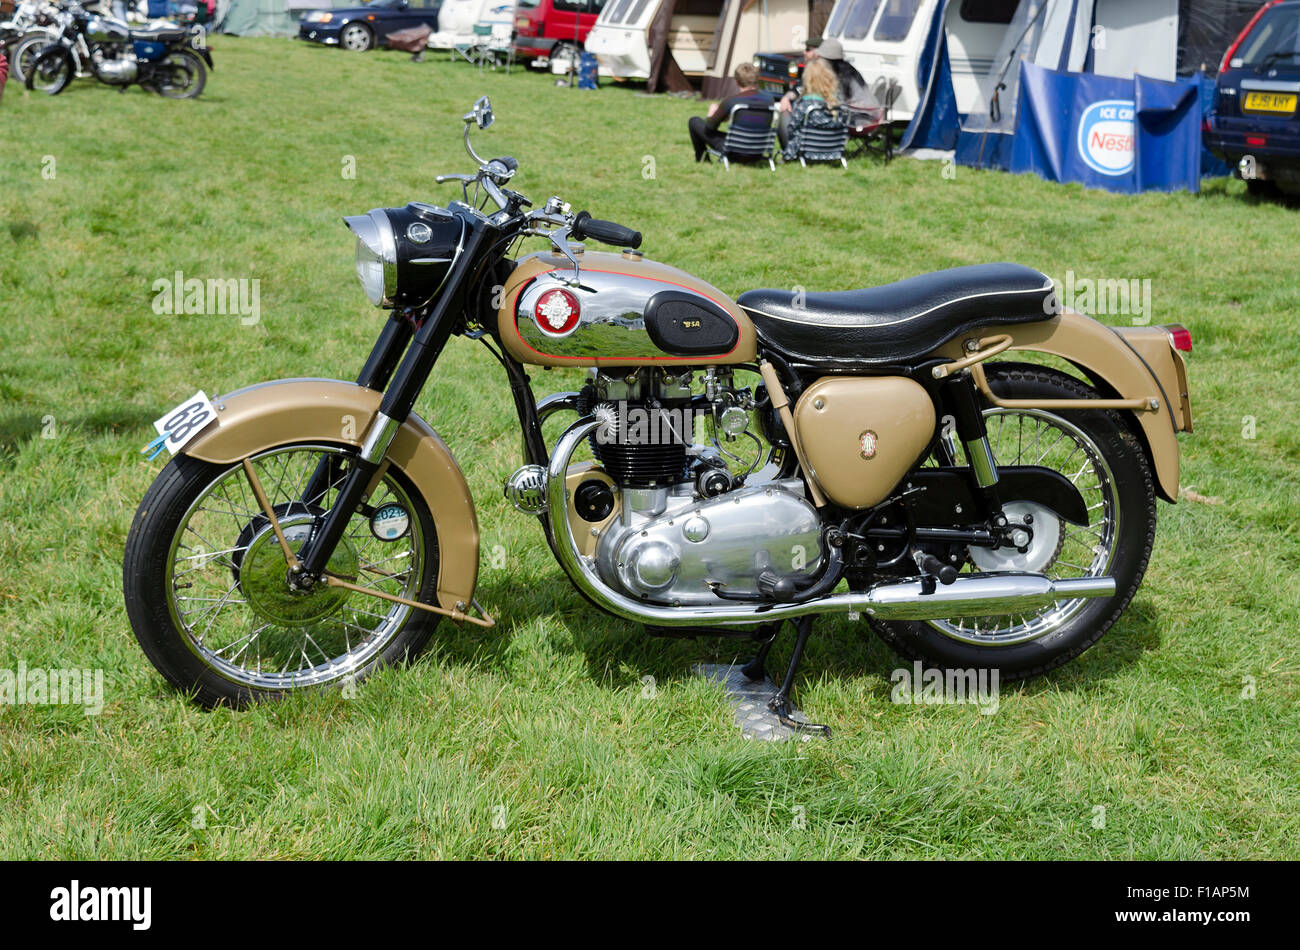 Bsa Motorbike Vintage High Resolution Stock Photography and Images - Alamy